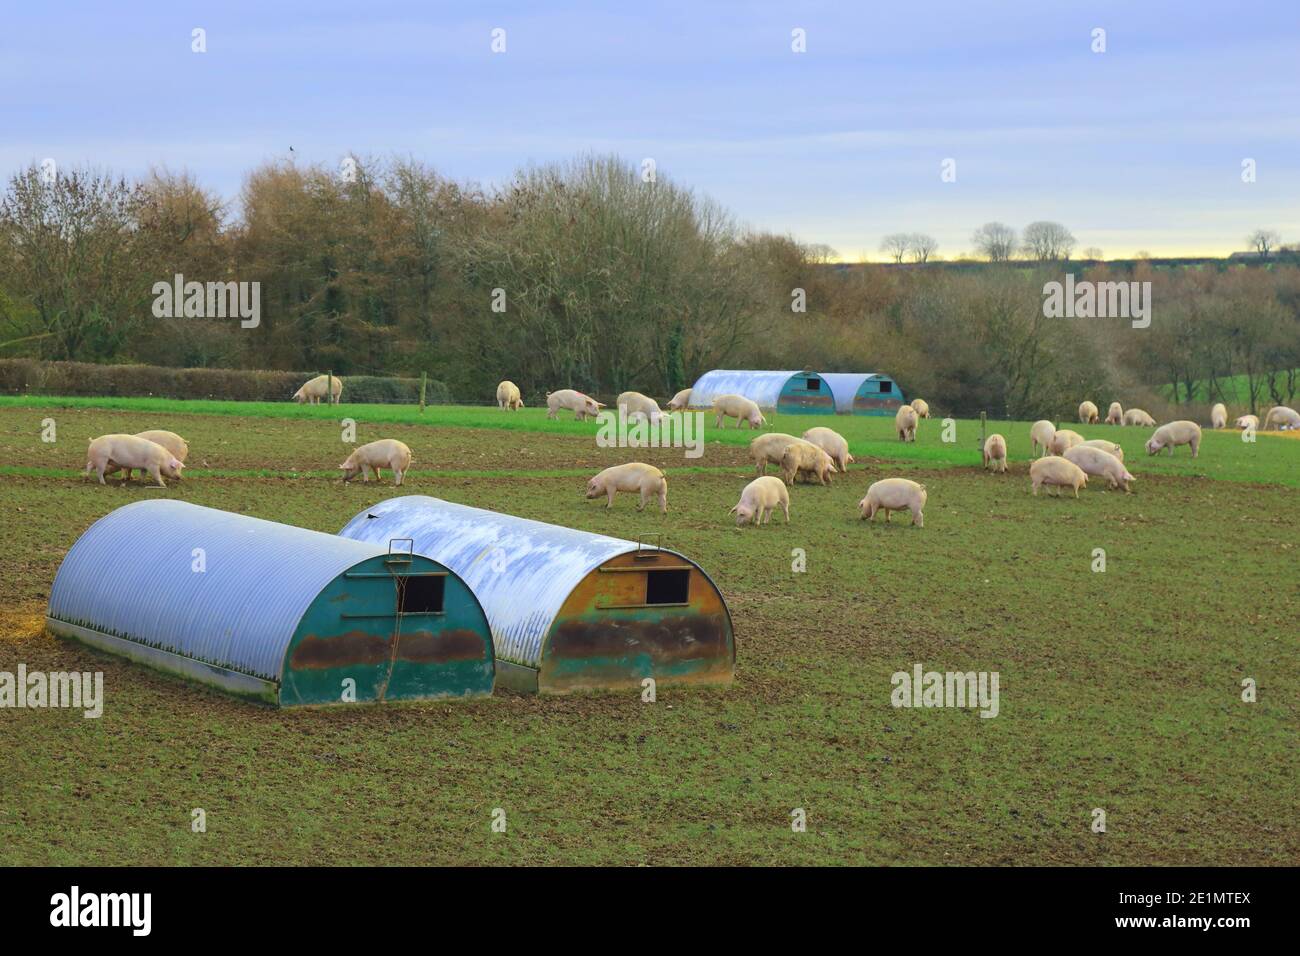 Pig farm on agricultural field in Devon UK Stock Photo